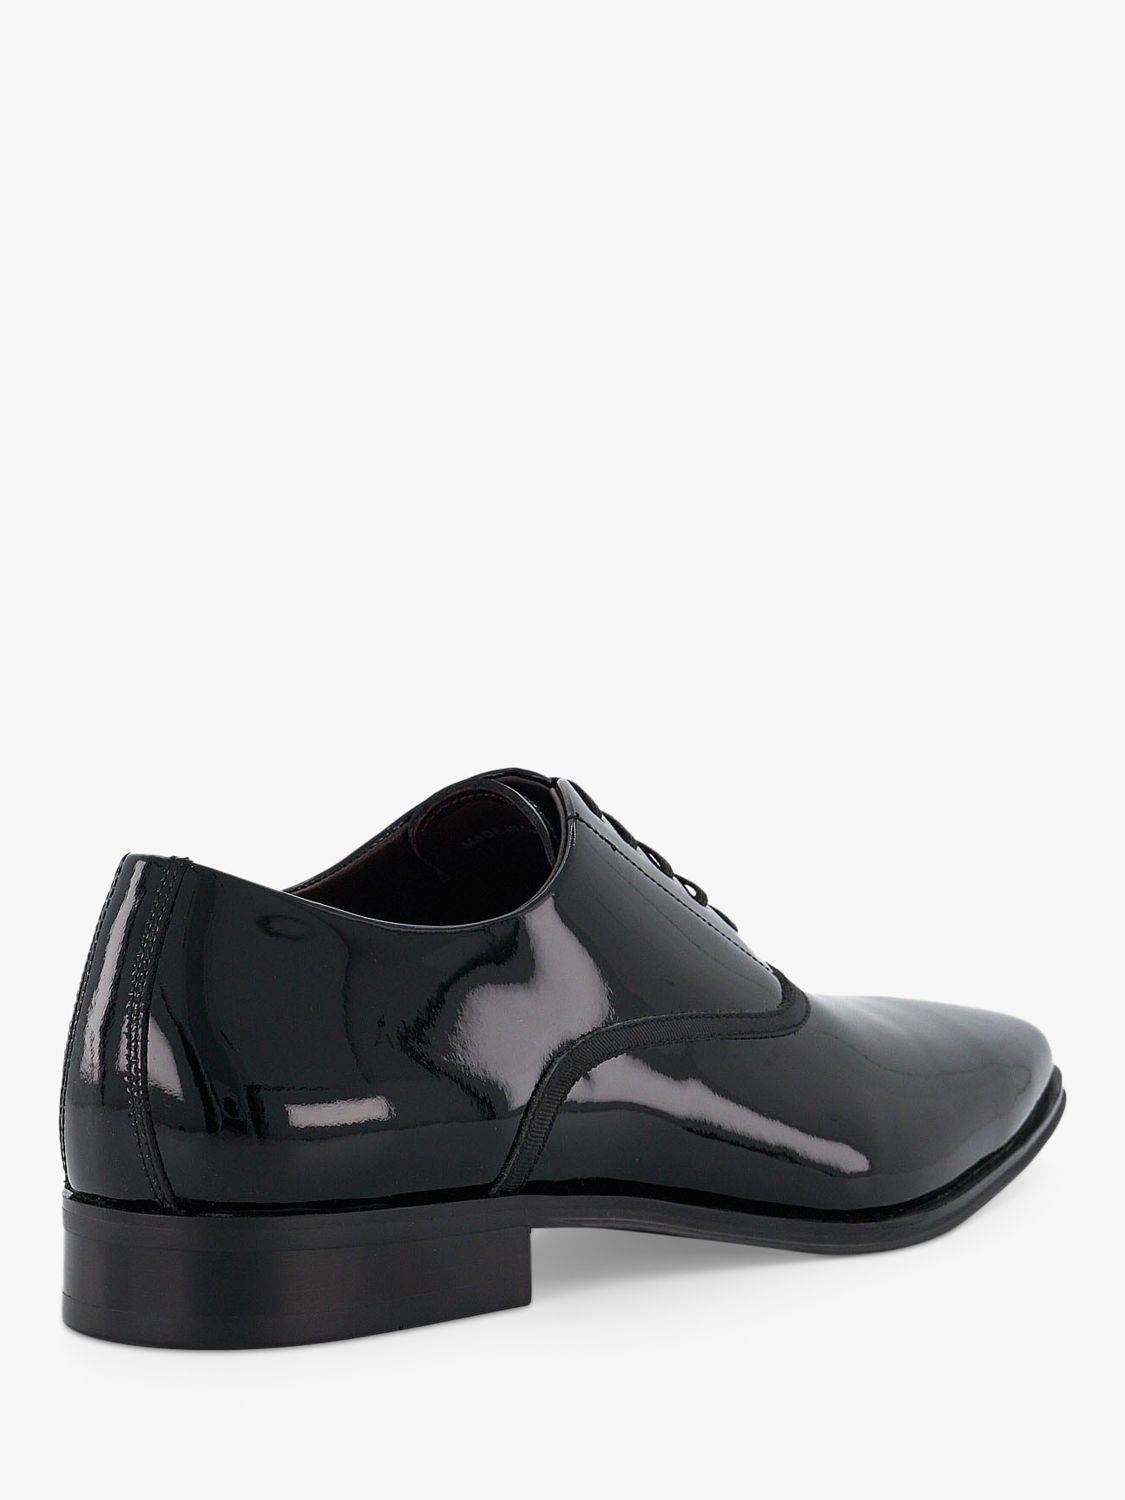 Dune Swallow Patent Leather Oxford Shoes, Black at John Lewis & Partners